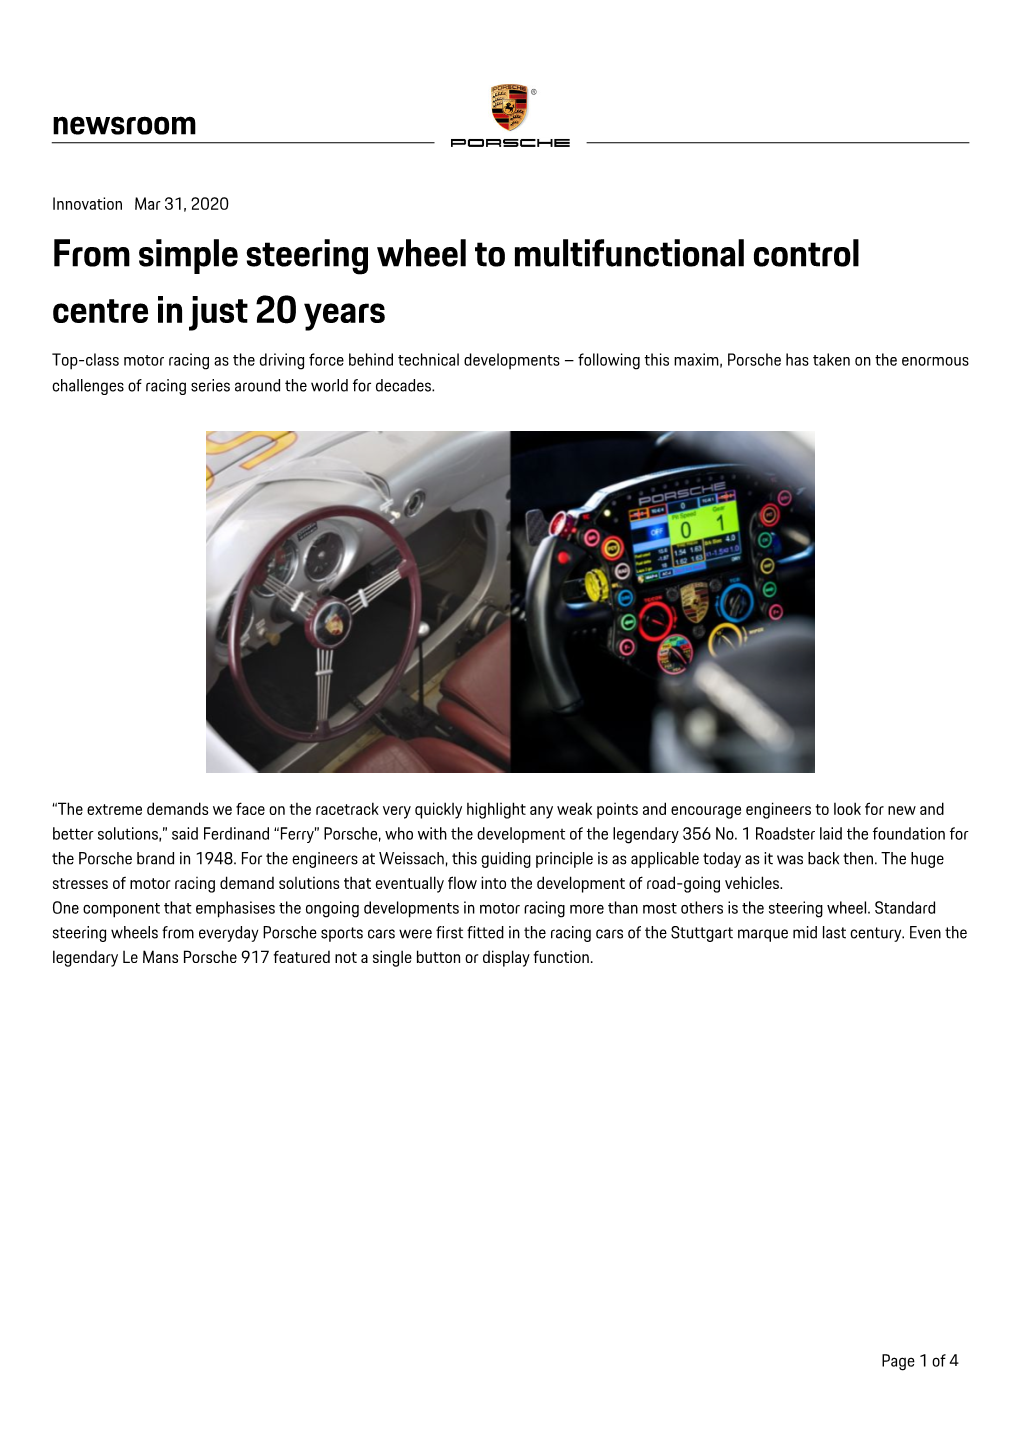 From Simple Steering Wheel to Multifunctional Control Centre in Just